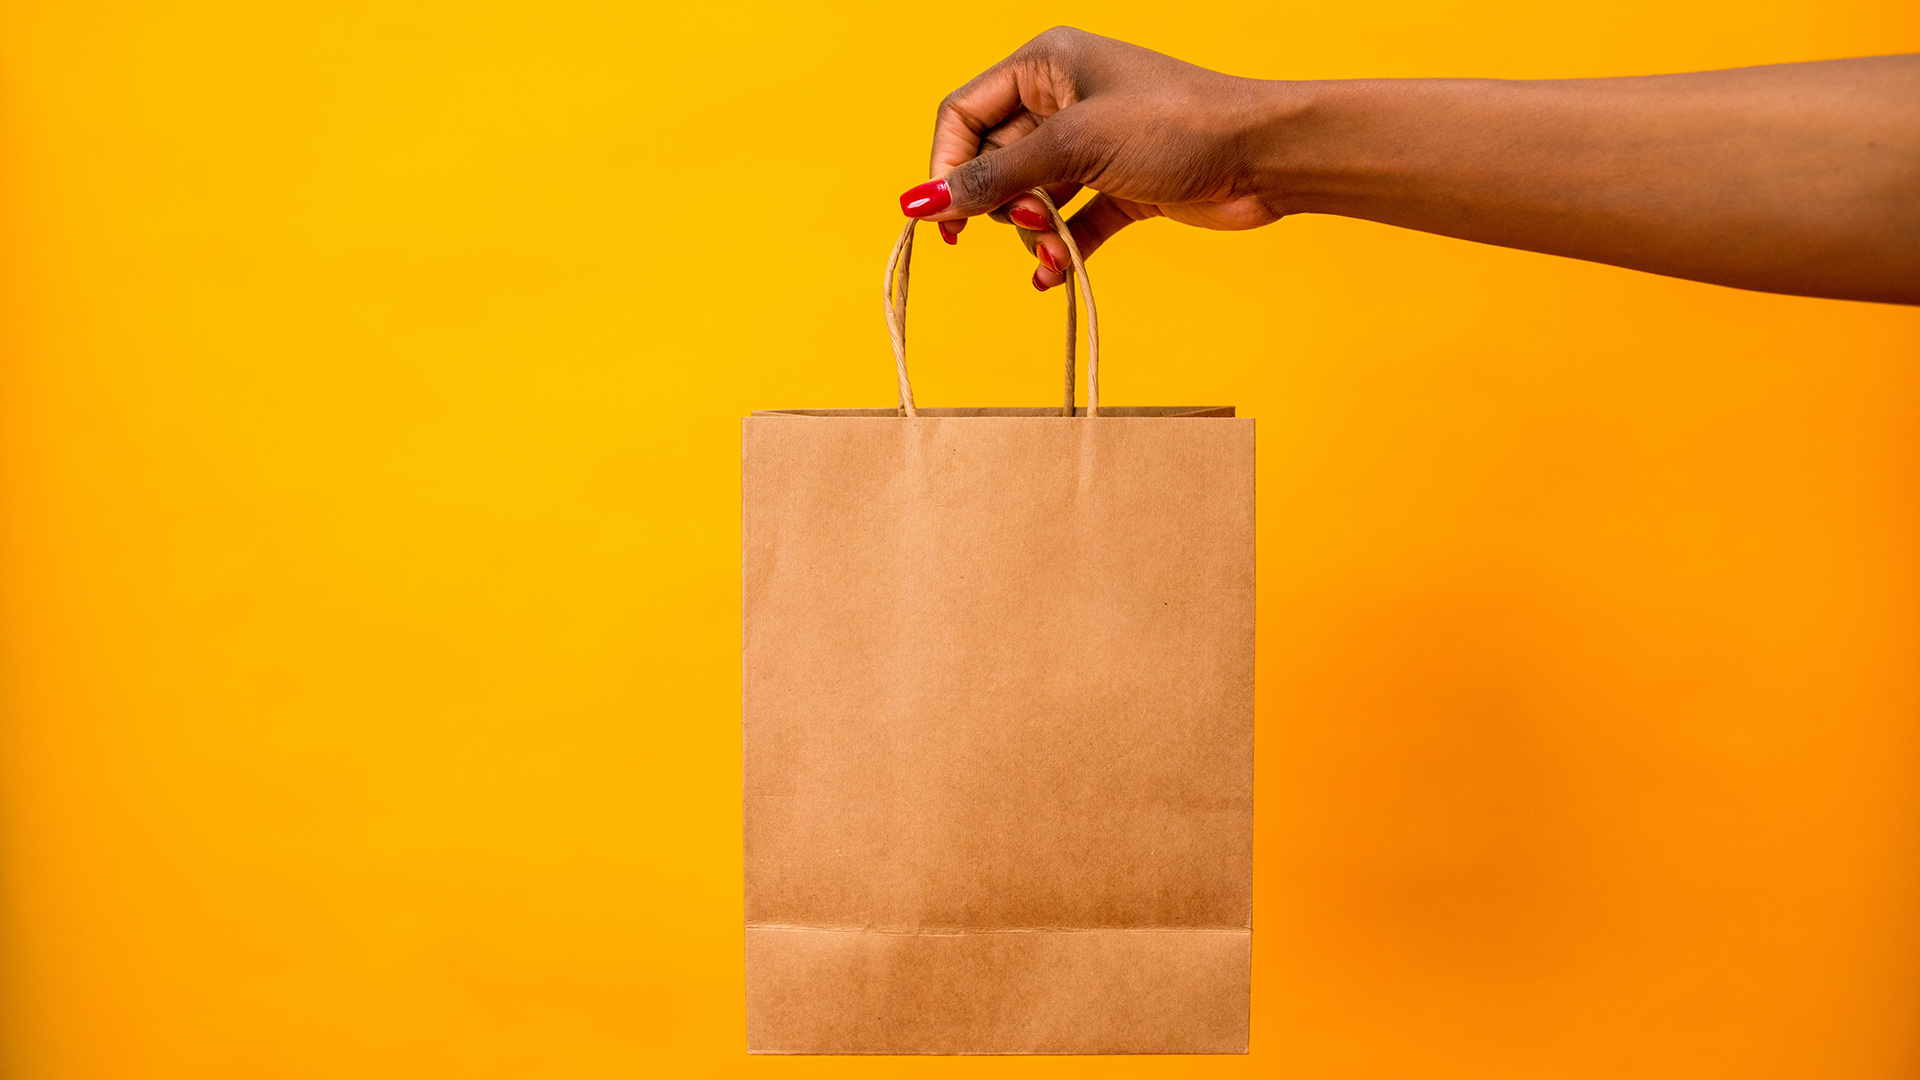 Hand holding a brown paper bag in front of a bright yellow background.